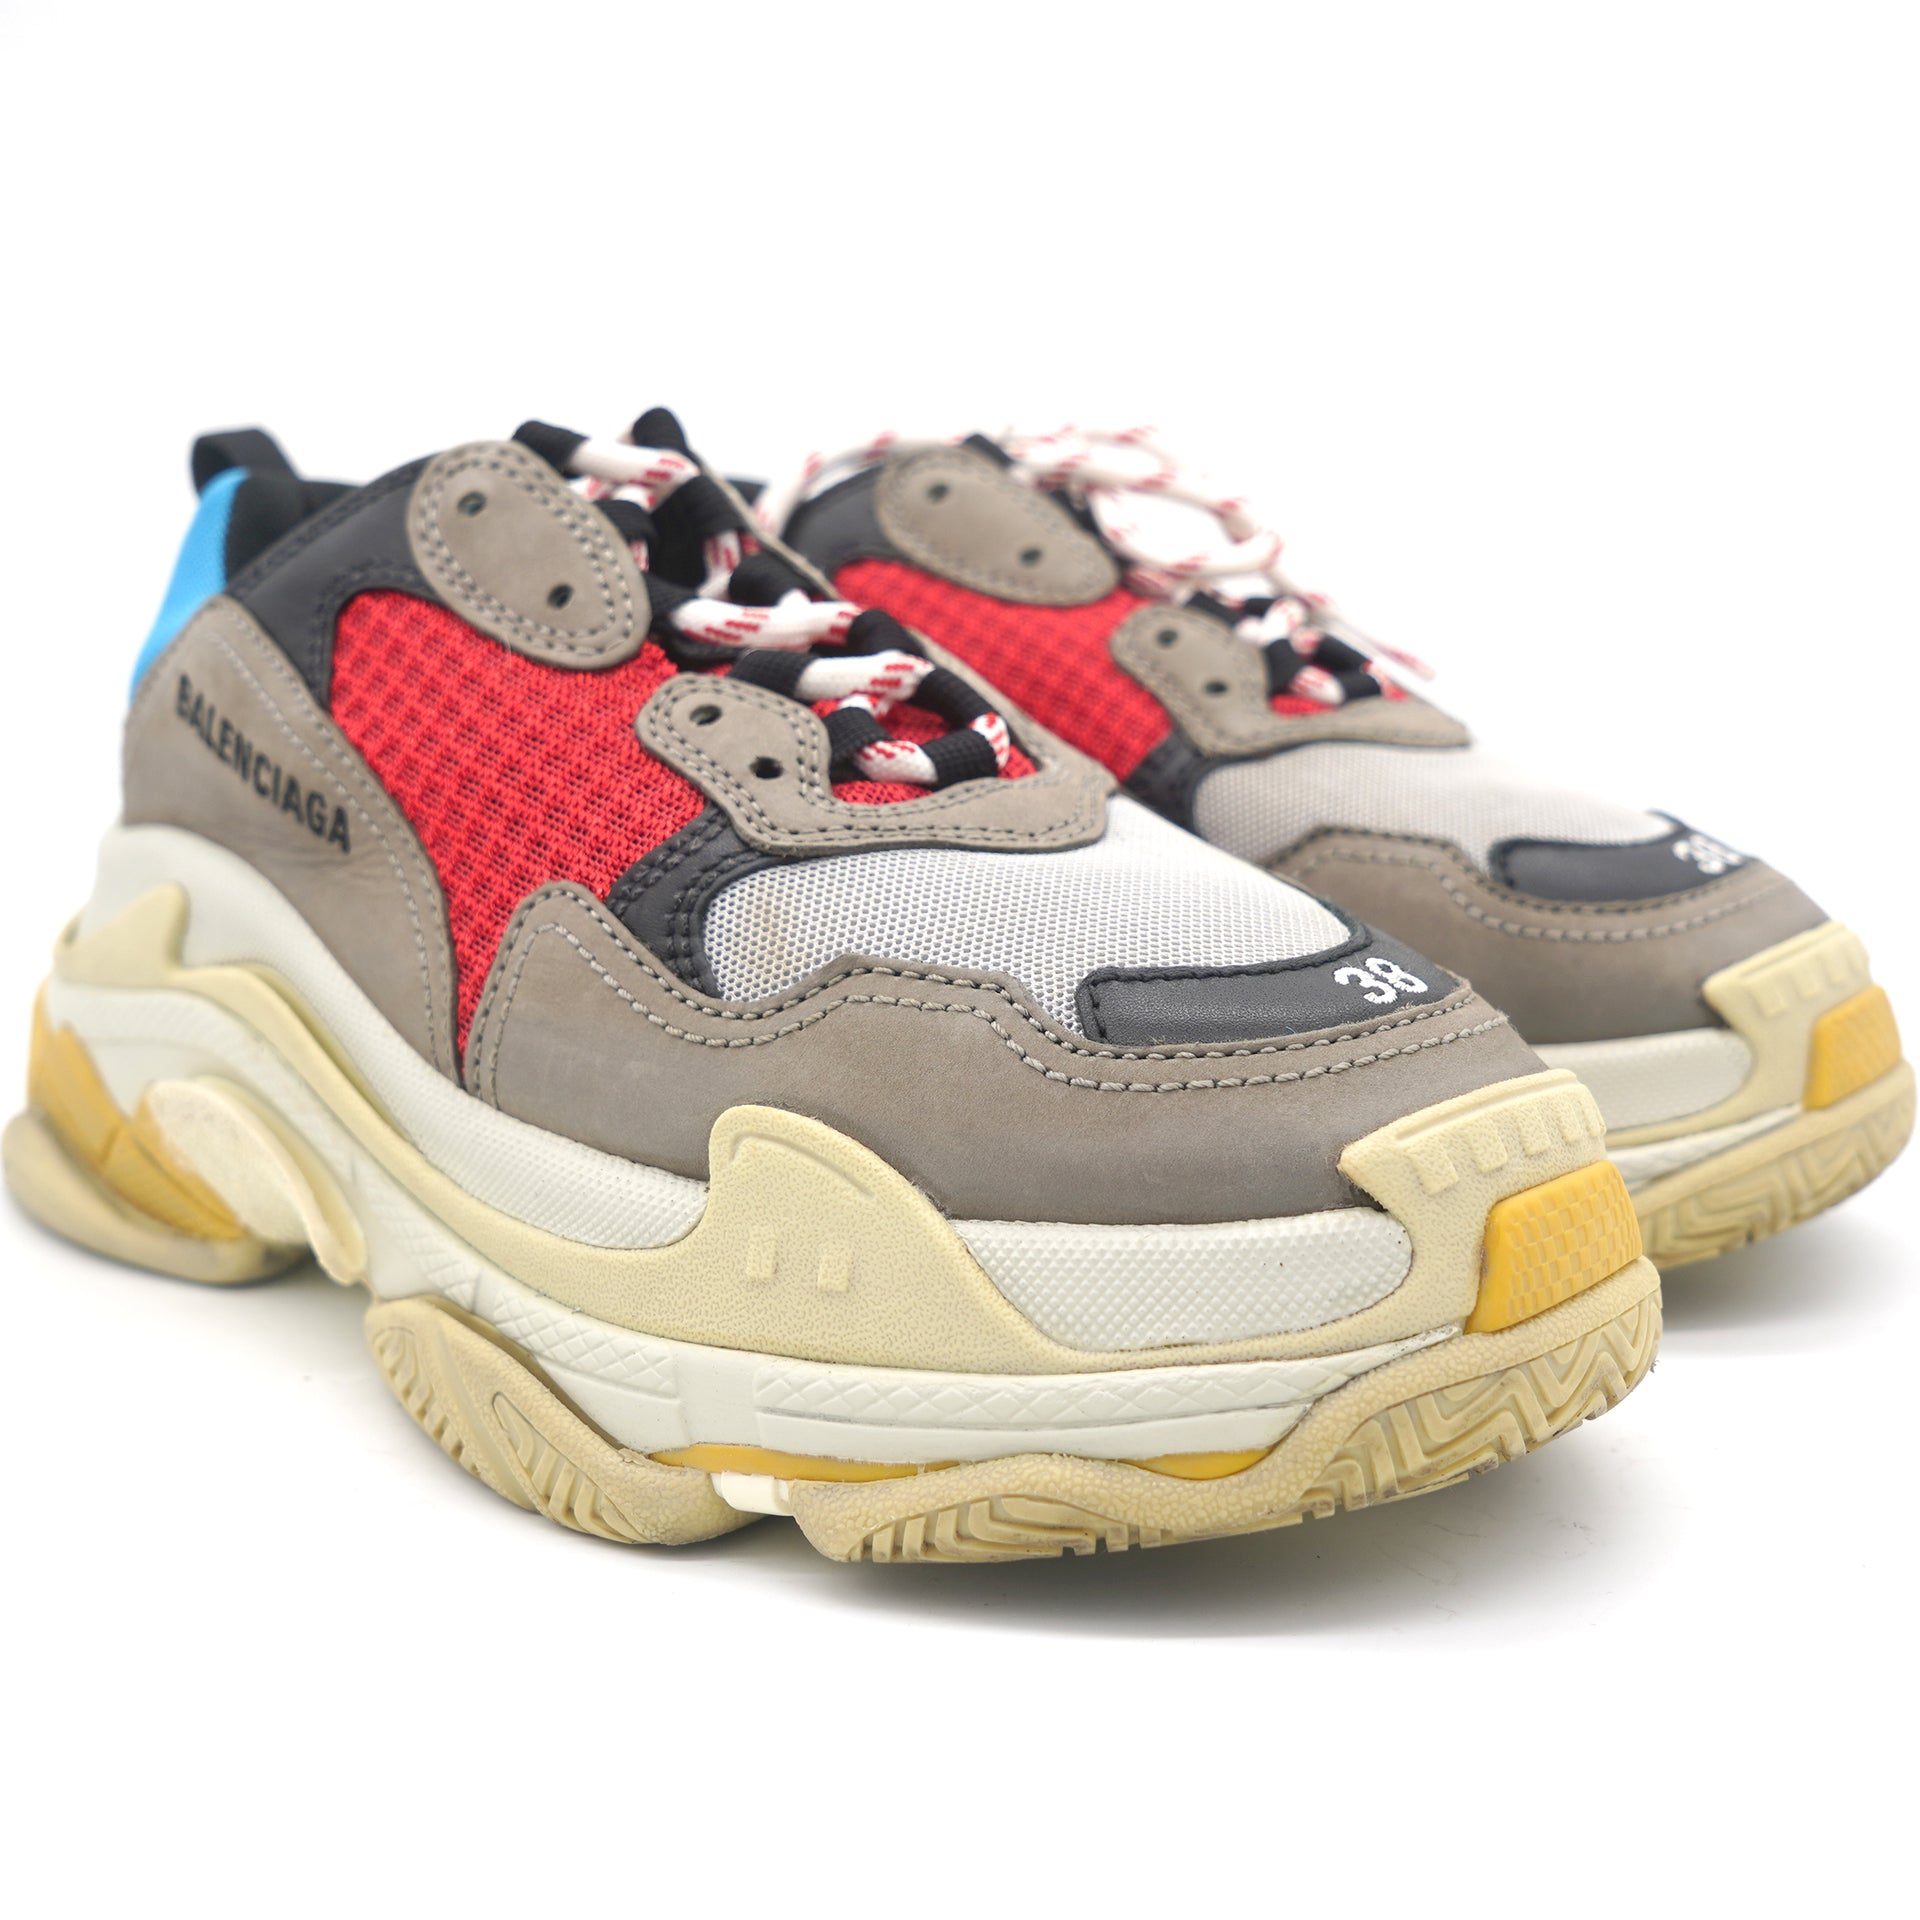 Triple S multi-panel sneakers Red and Blue 38